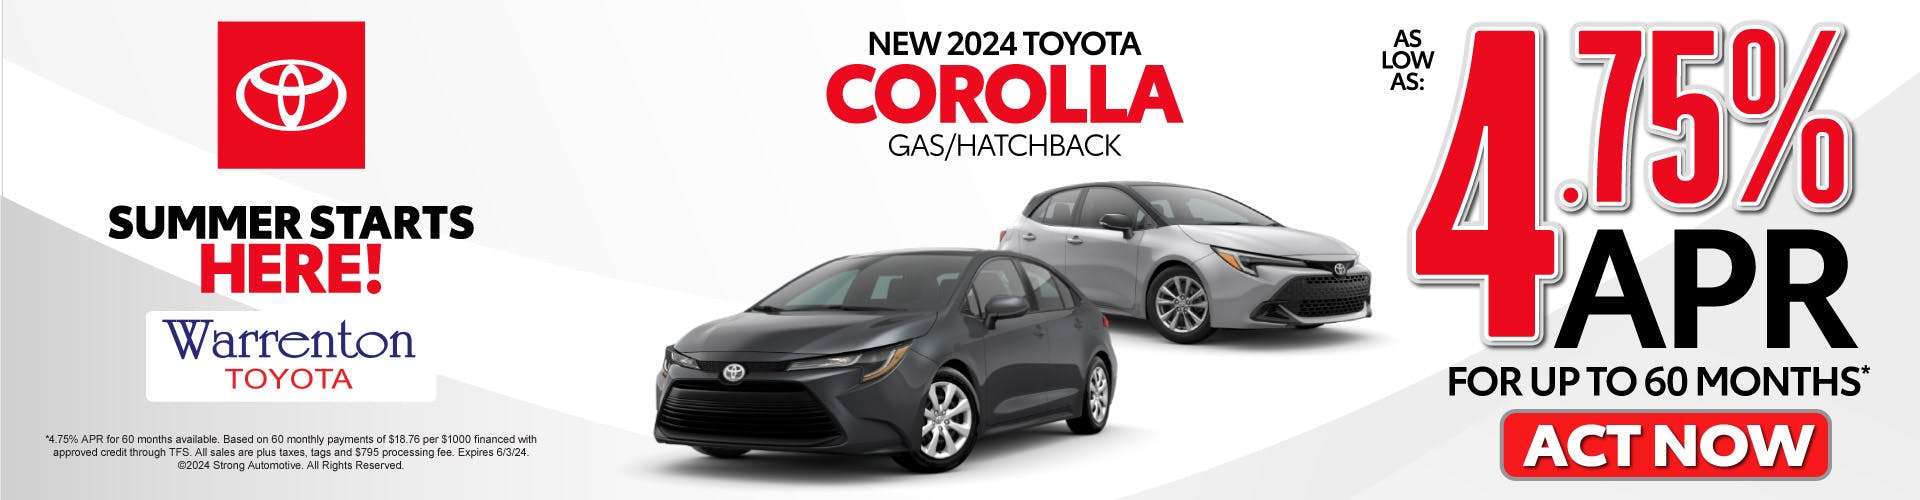 New 2024 Toyota Corolla Gas/Hatchback – As Low as 4.75% APR for up to 60 months* – Act Now